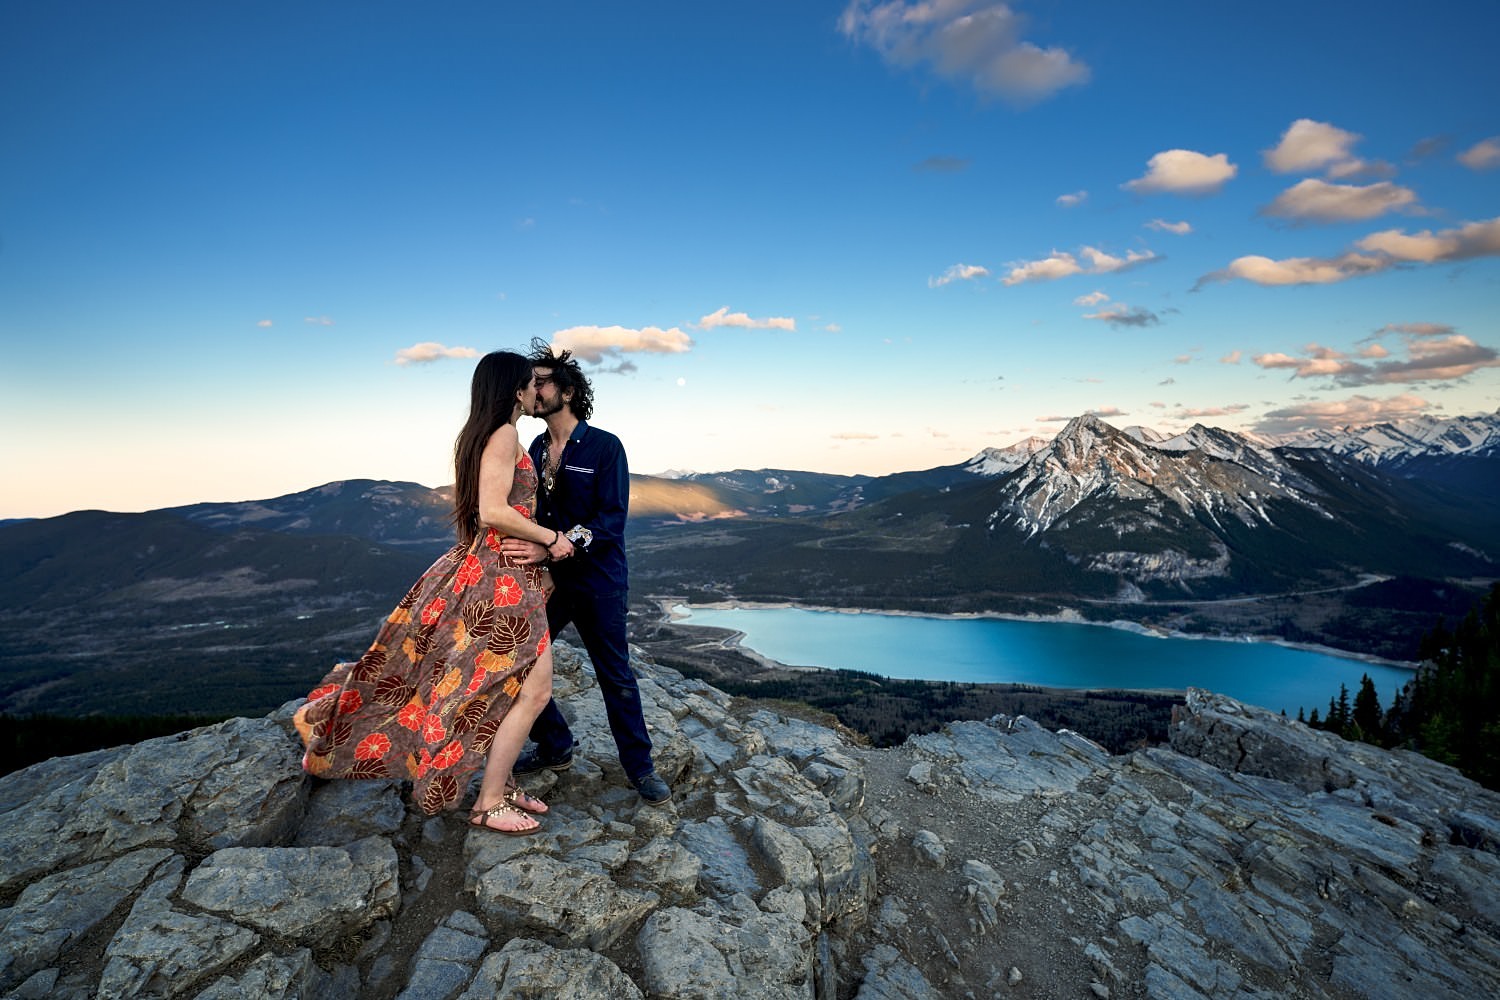 Engaged couple on the top of the mountain against blue lake in Kananaskis Country. | 4Eyes Photography